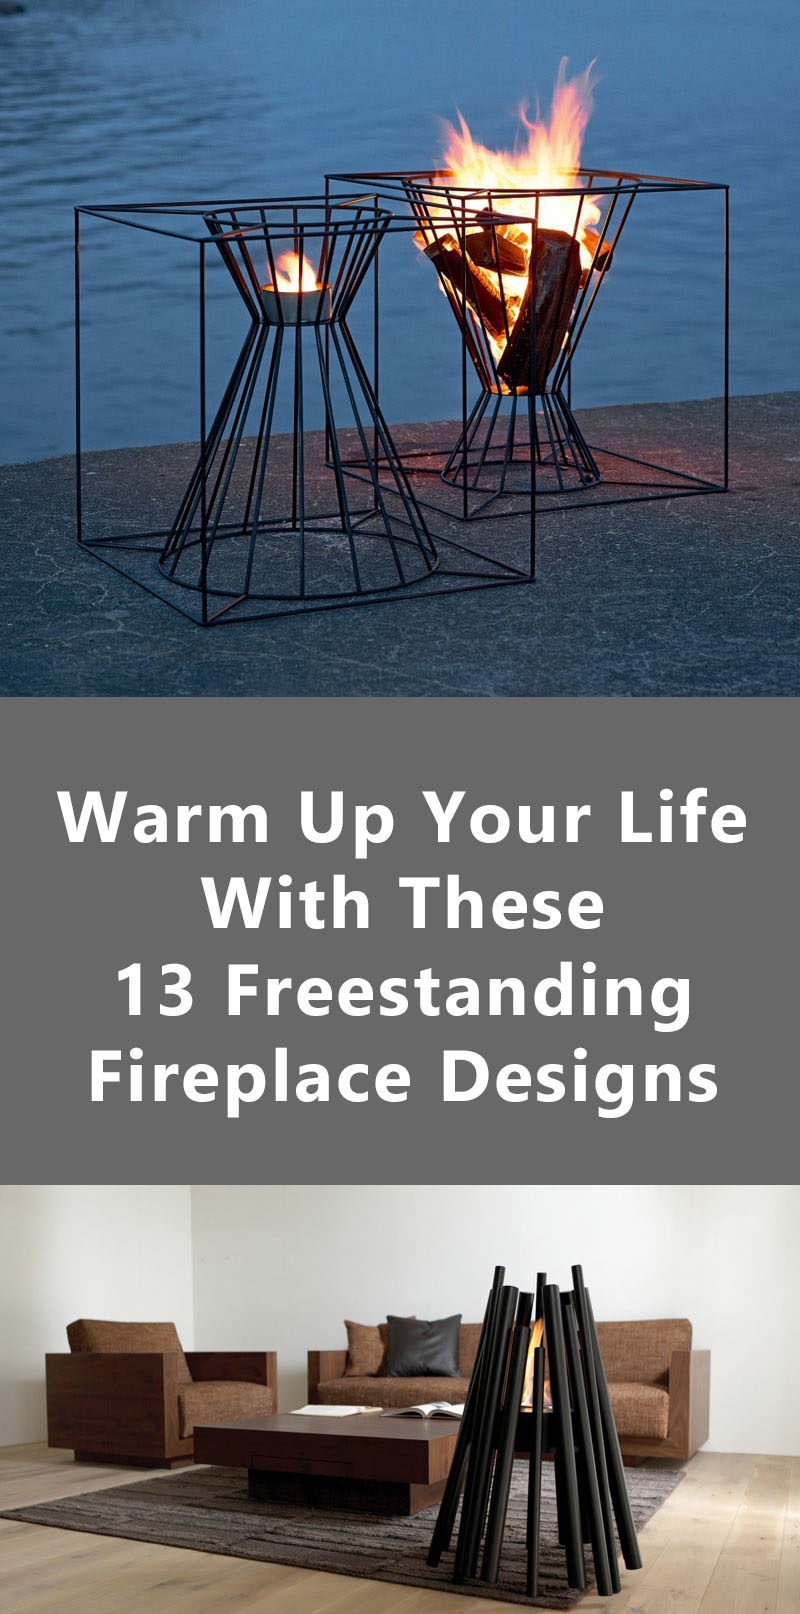 Warm Up Your Life With These 13 Freestanding Fireplace Designs